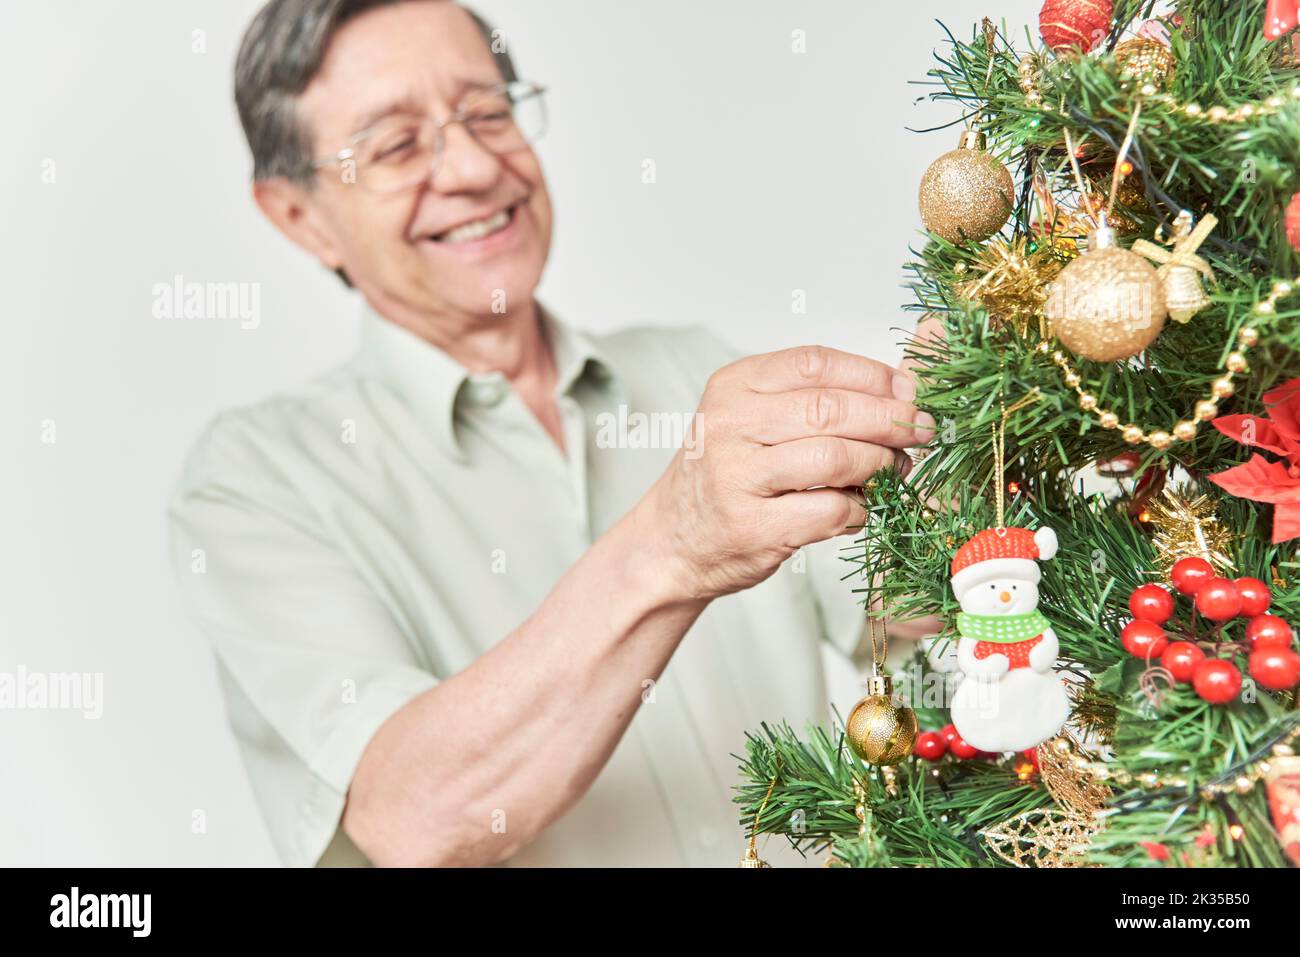 Happy senior latin man smiling while decorating a traditional Christmas tree at home. Selective focus on the foreground, the hands hanging a bauble fr Stock Photo